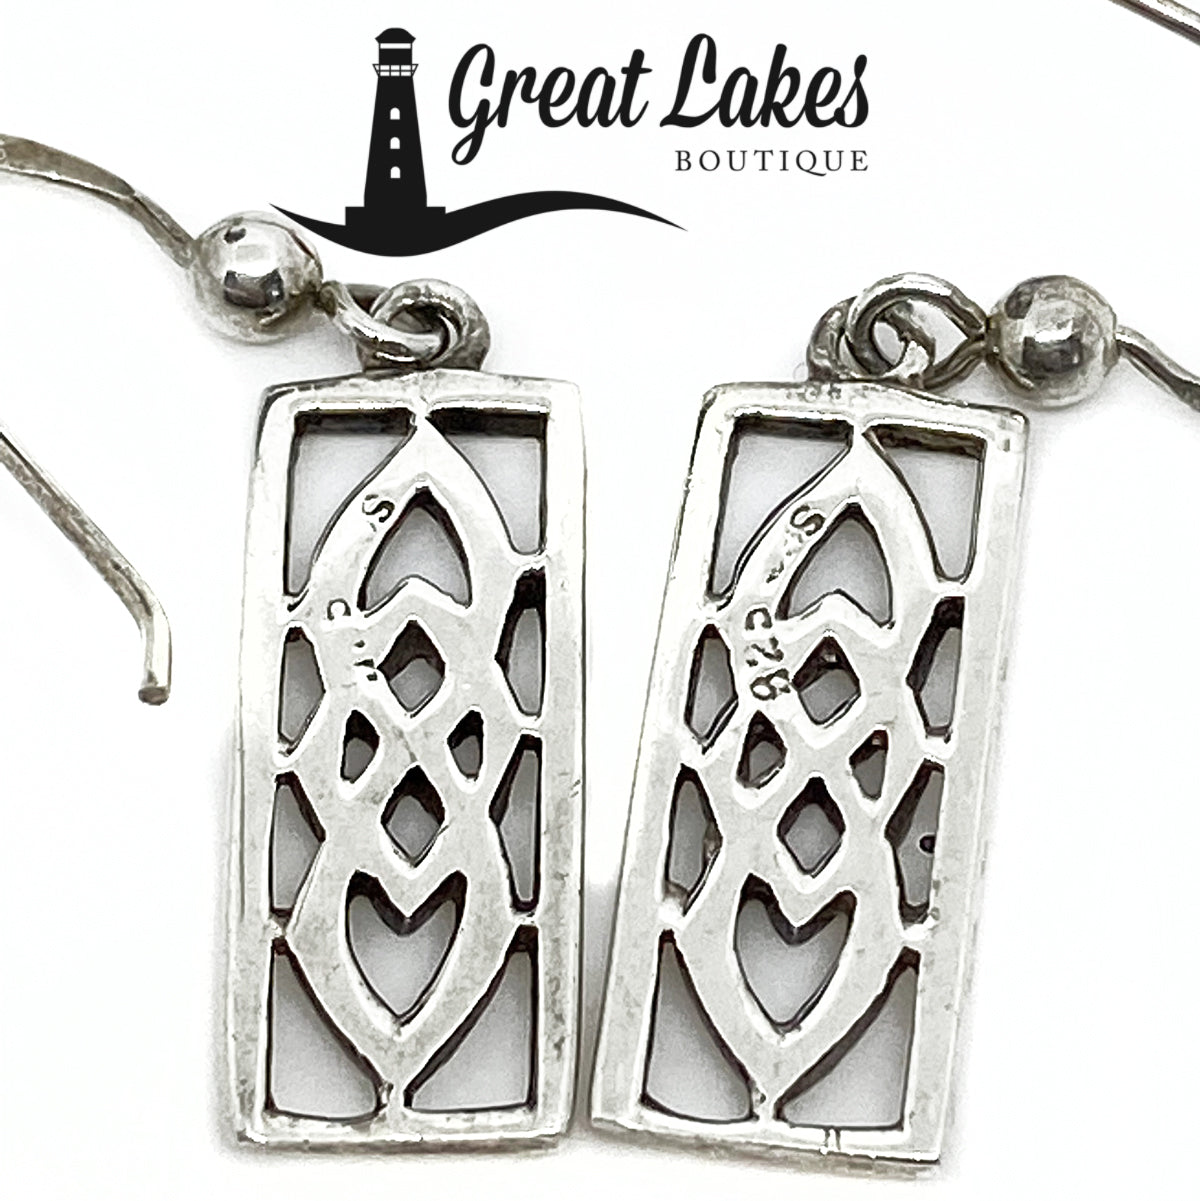 Great Lakes Boutique Silver Filigree Earrings